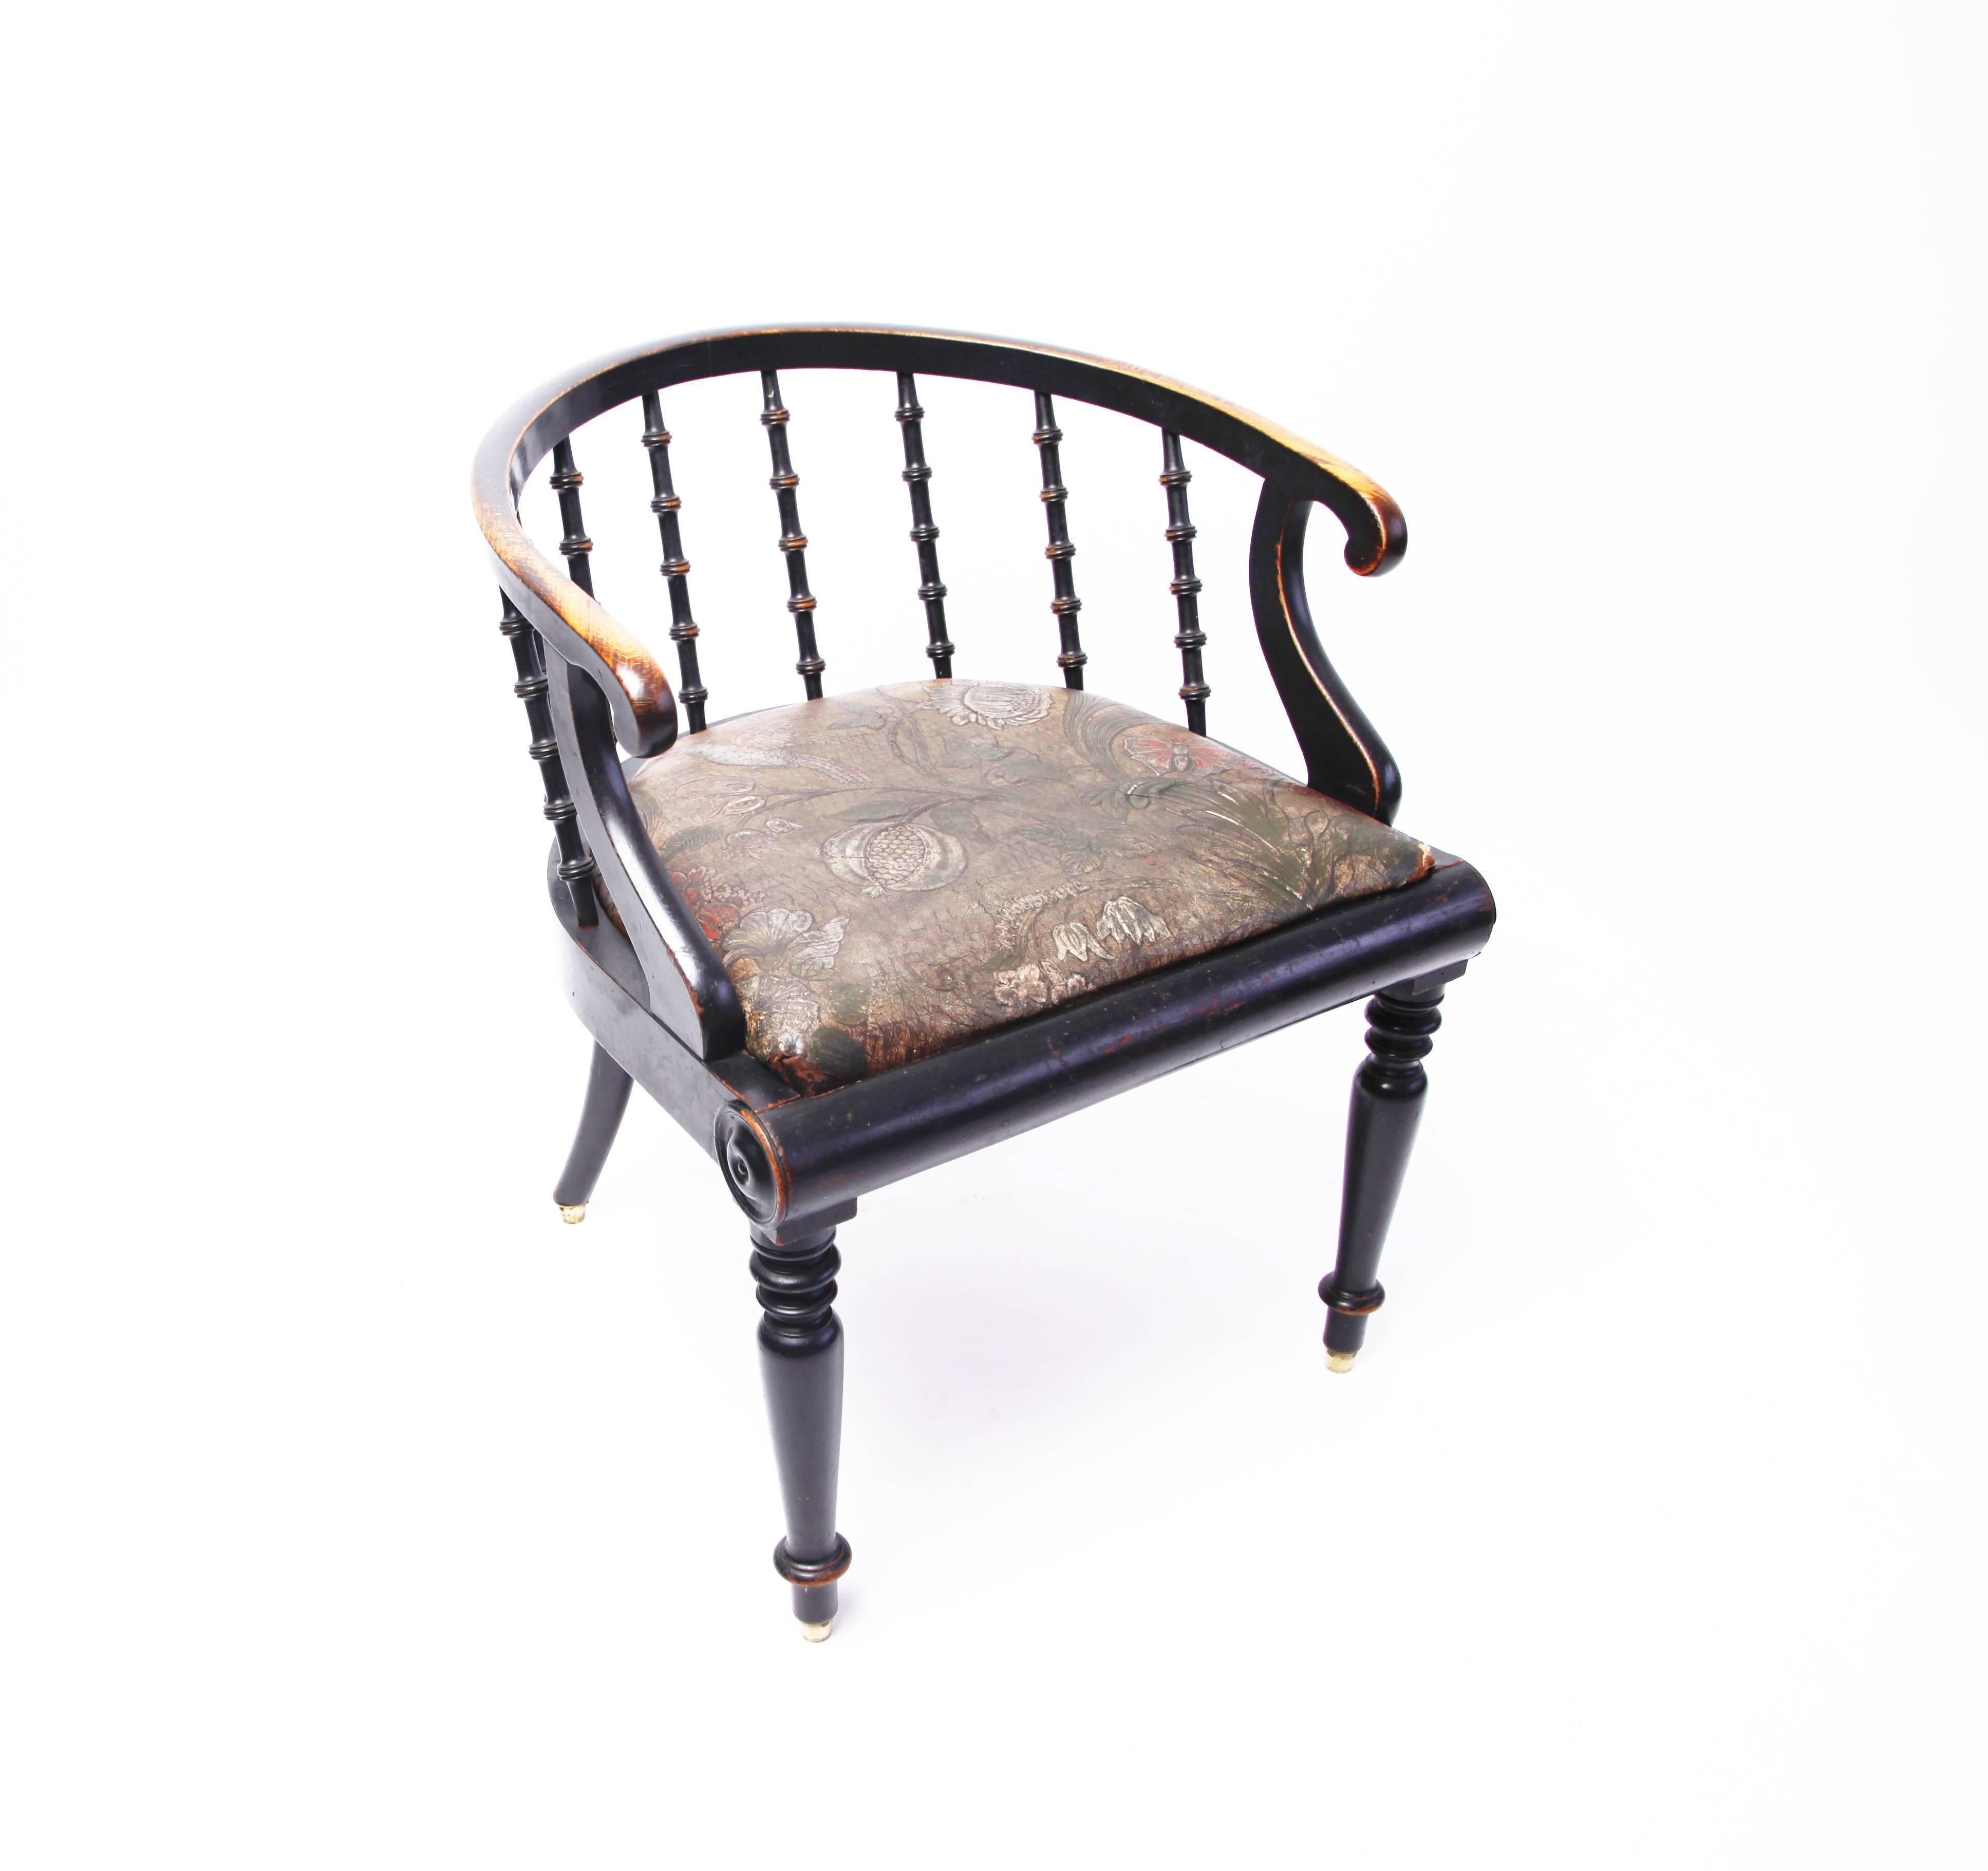 A very handsome mid-19th century ebonized armchair from Denmark. The harmony of the neoclassical form enlivened by the unusual embossed and painted leather seat richly decorated with flowers and birds.